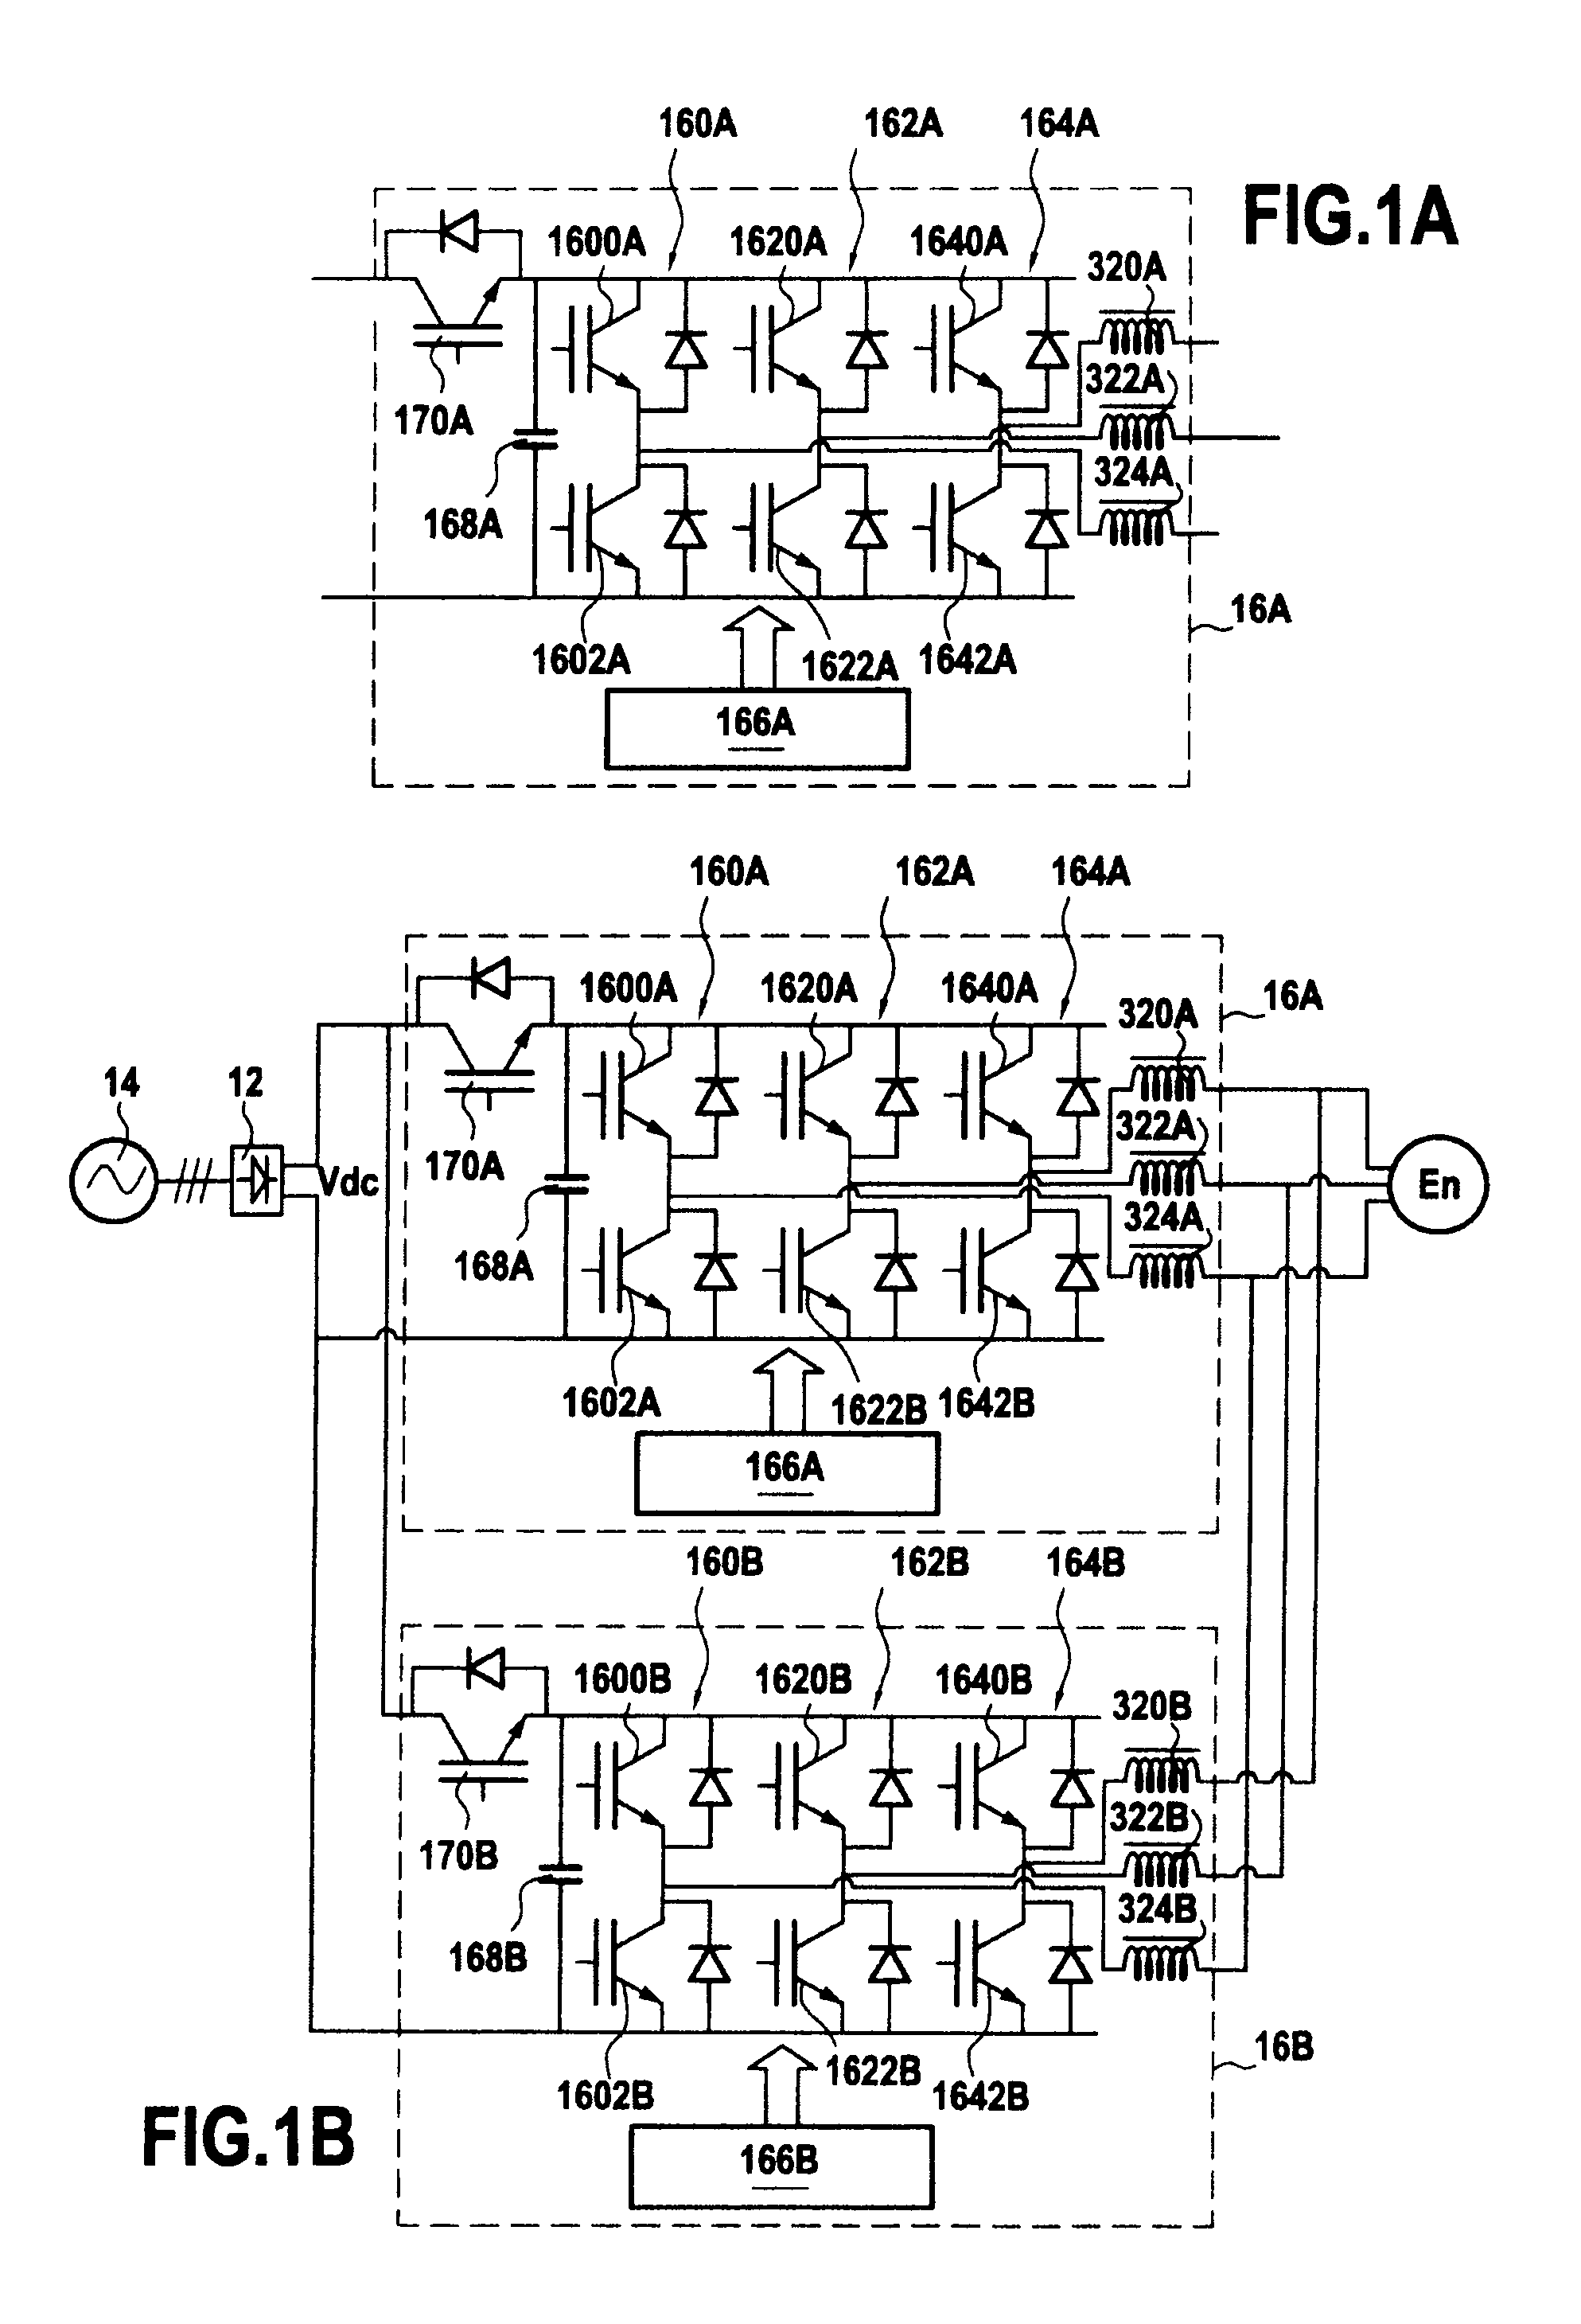 Electrical system for starting up aircraft engines